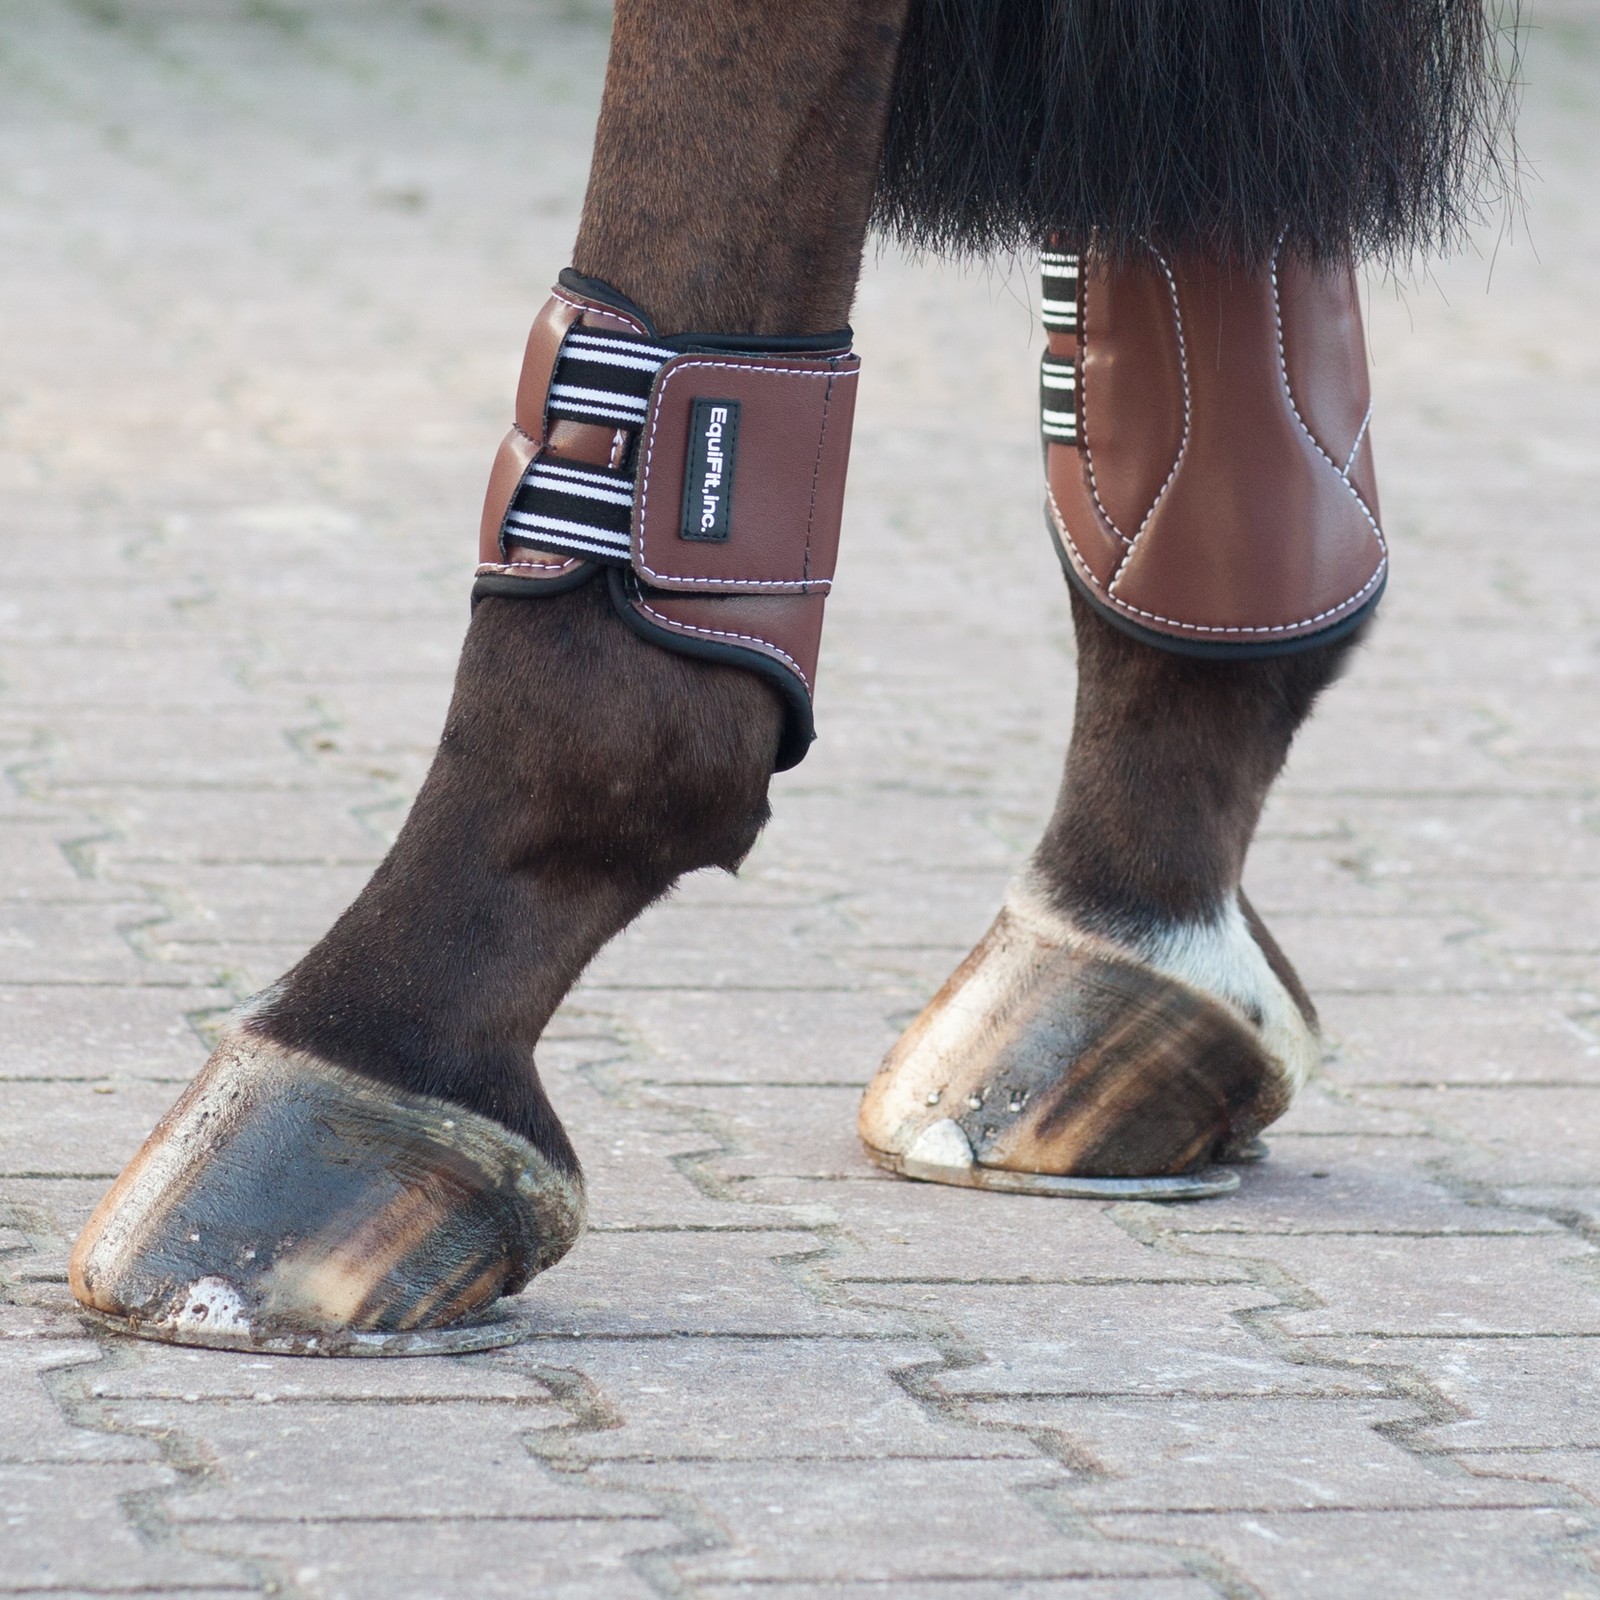 equifit horse boots